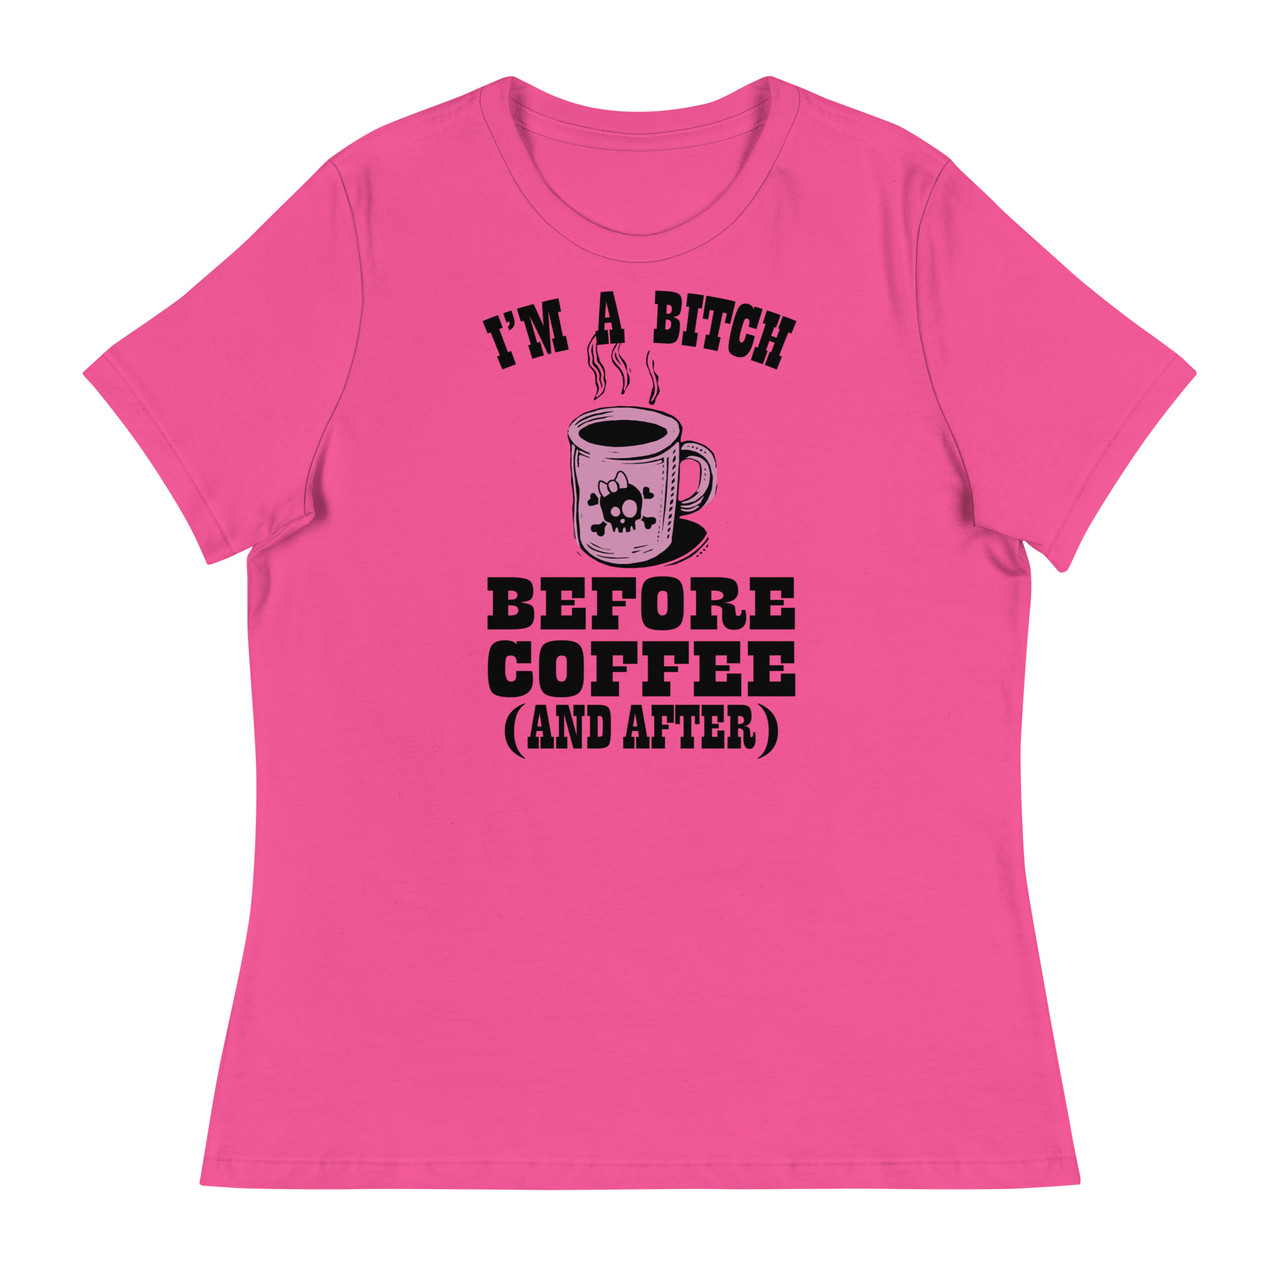 I'm a Bitch Before Coffee Women's Relaxed T-Shirt - Bella + Canvas 6400 